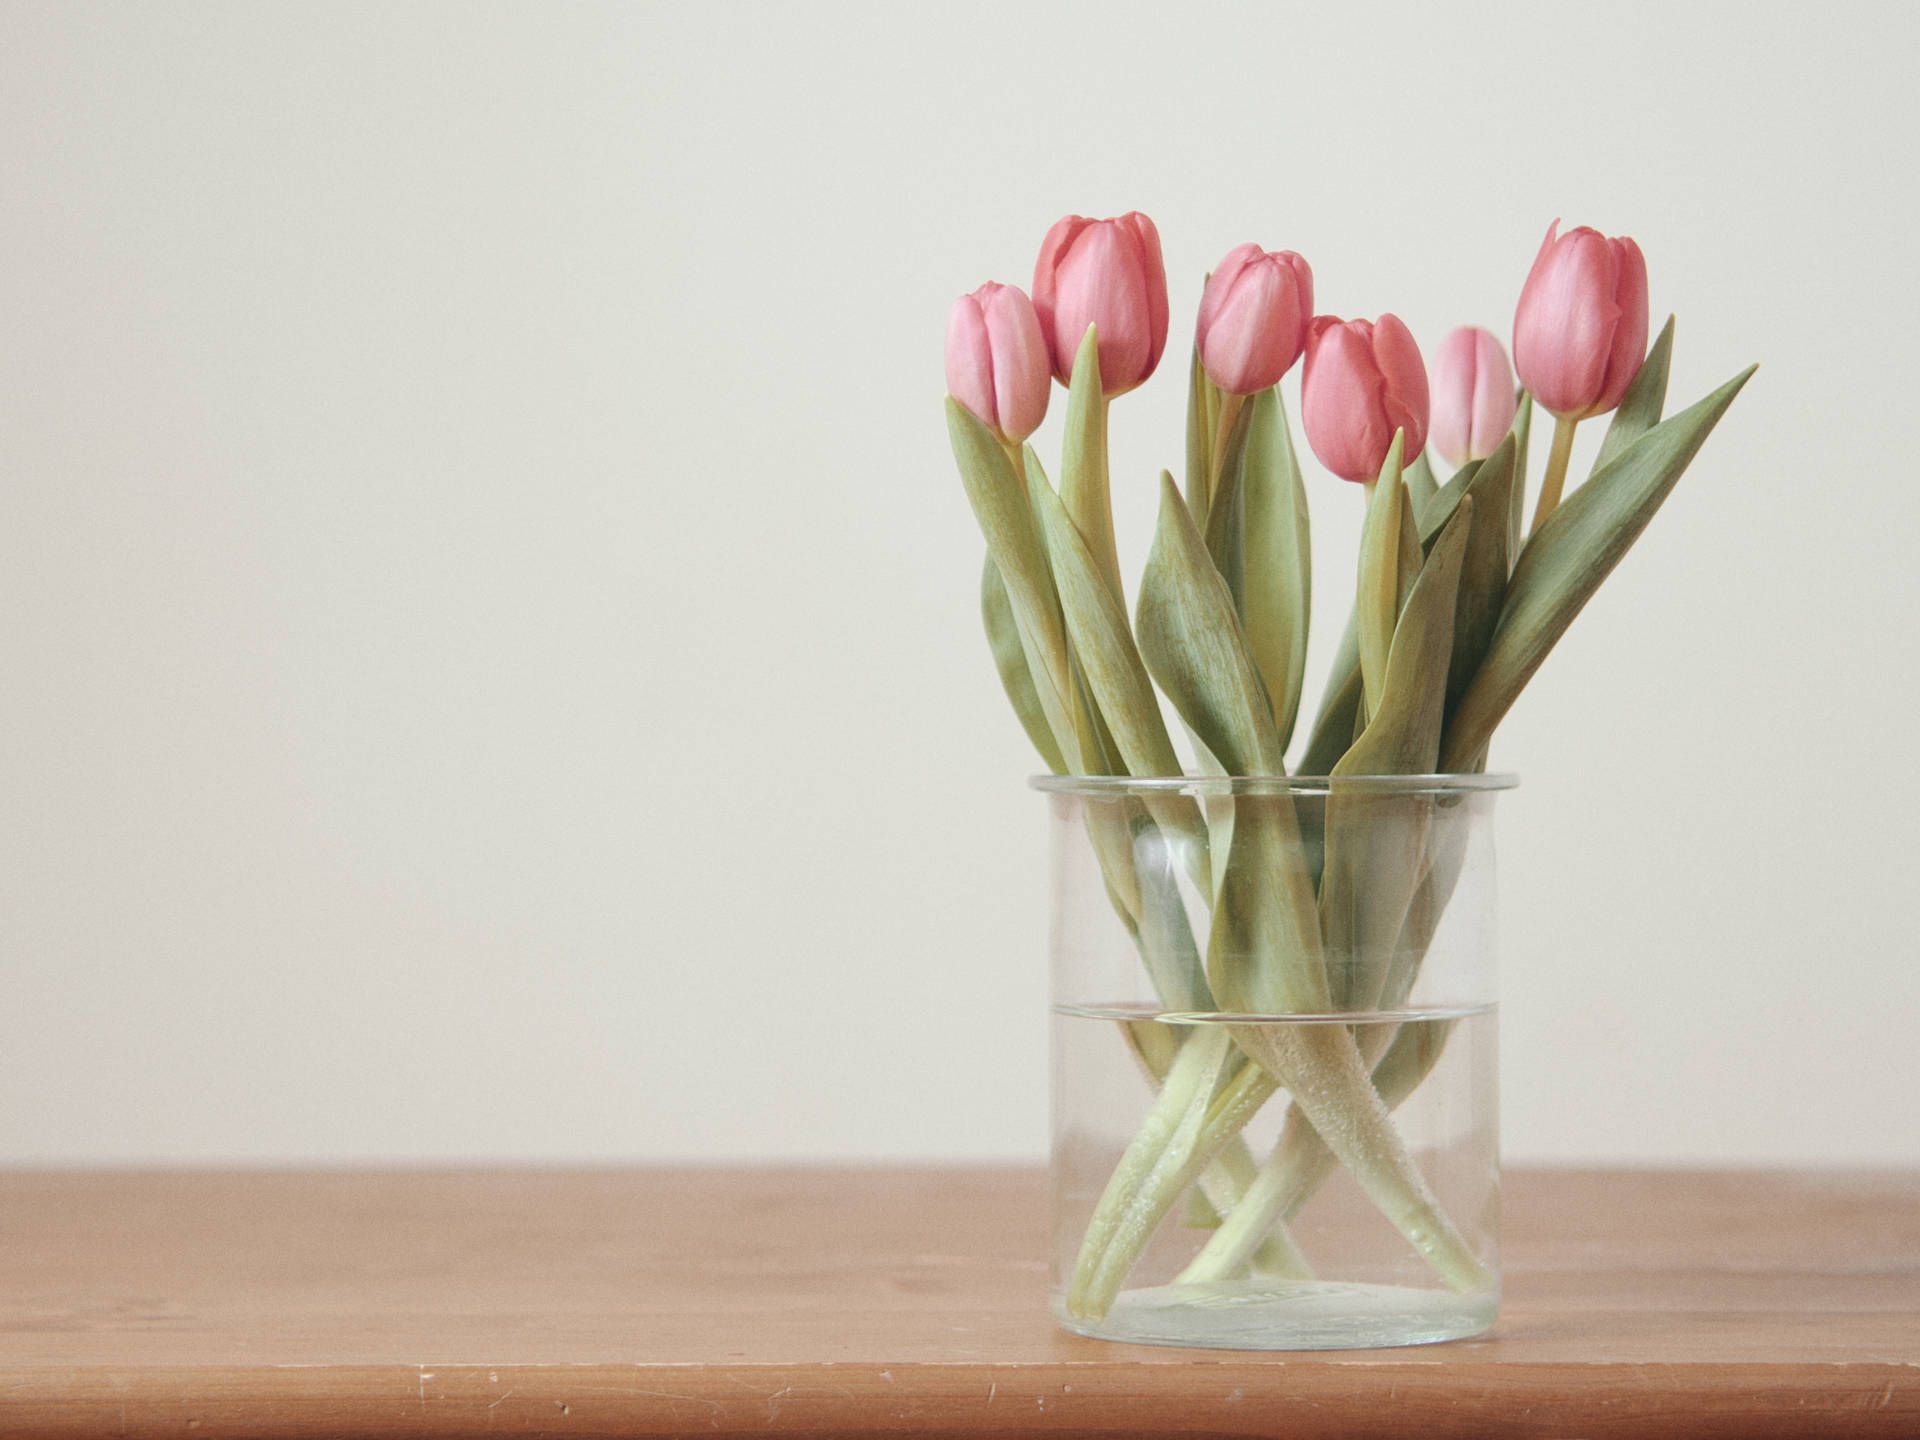 Pink tulips in a glass vase on a wooden table. - Tulip